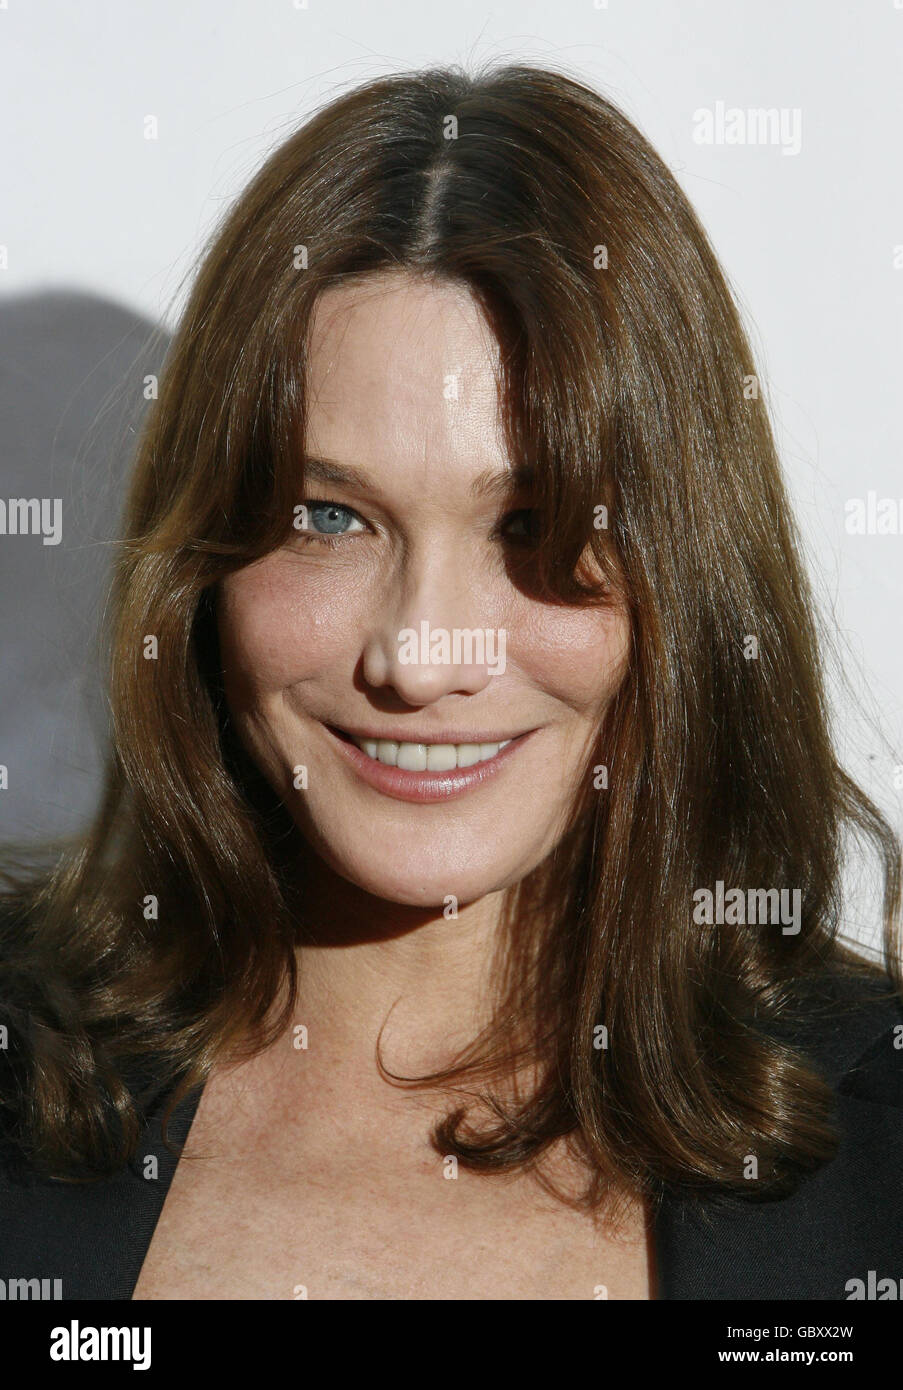 France's first lady Carla Bruni-Sarkozy, attends the Mandela Day: A 46664 Celebration Concert at Radio City Music Hall in New York City. Stock Photo